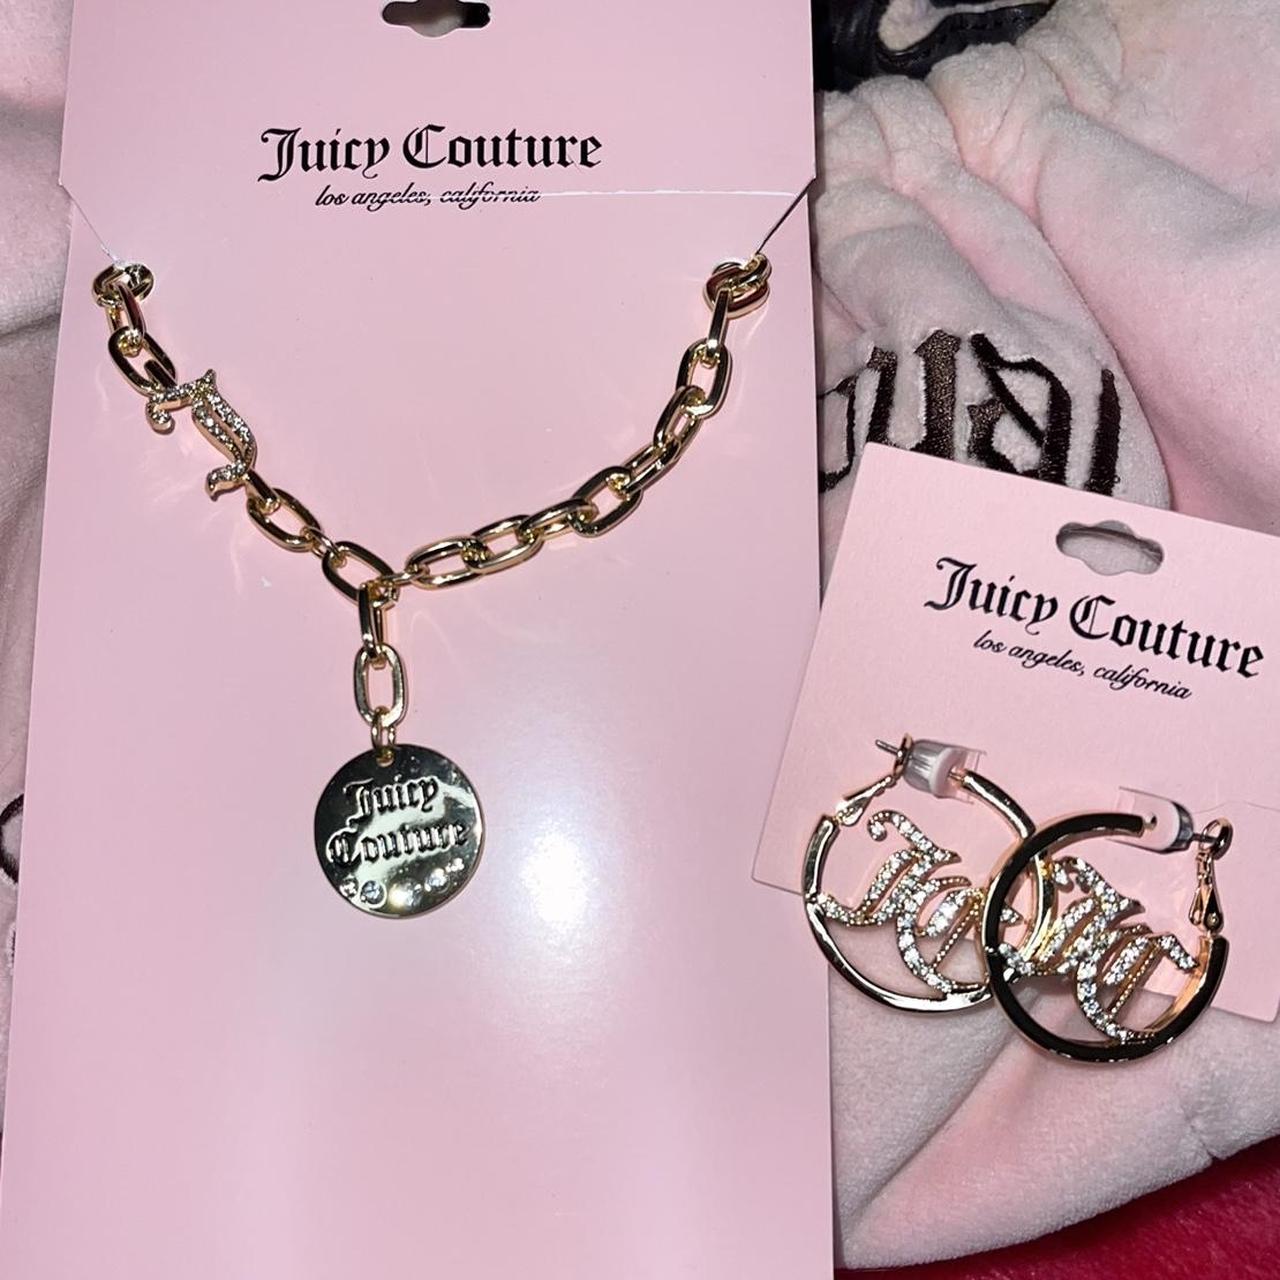 🎀Juicy couture necklace + earring set🎀 Gold juicy - Depop